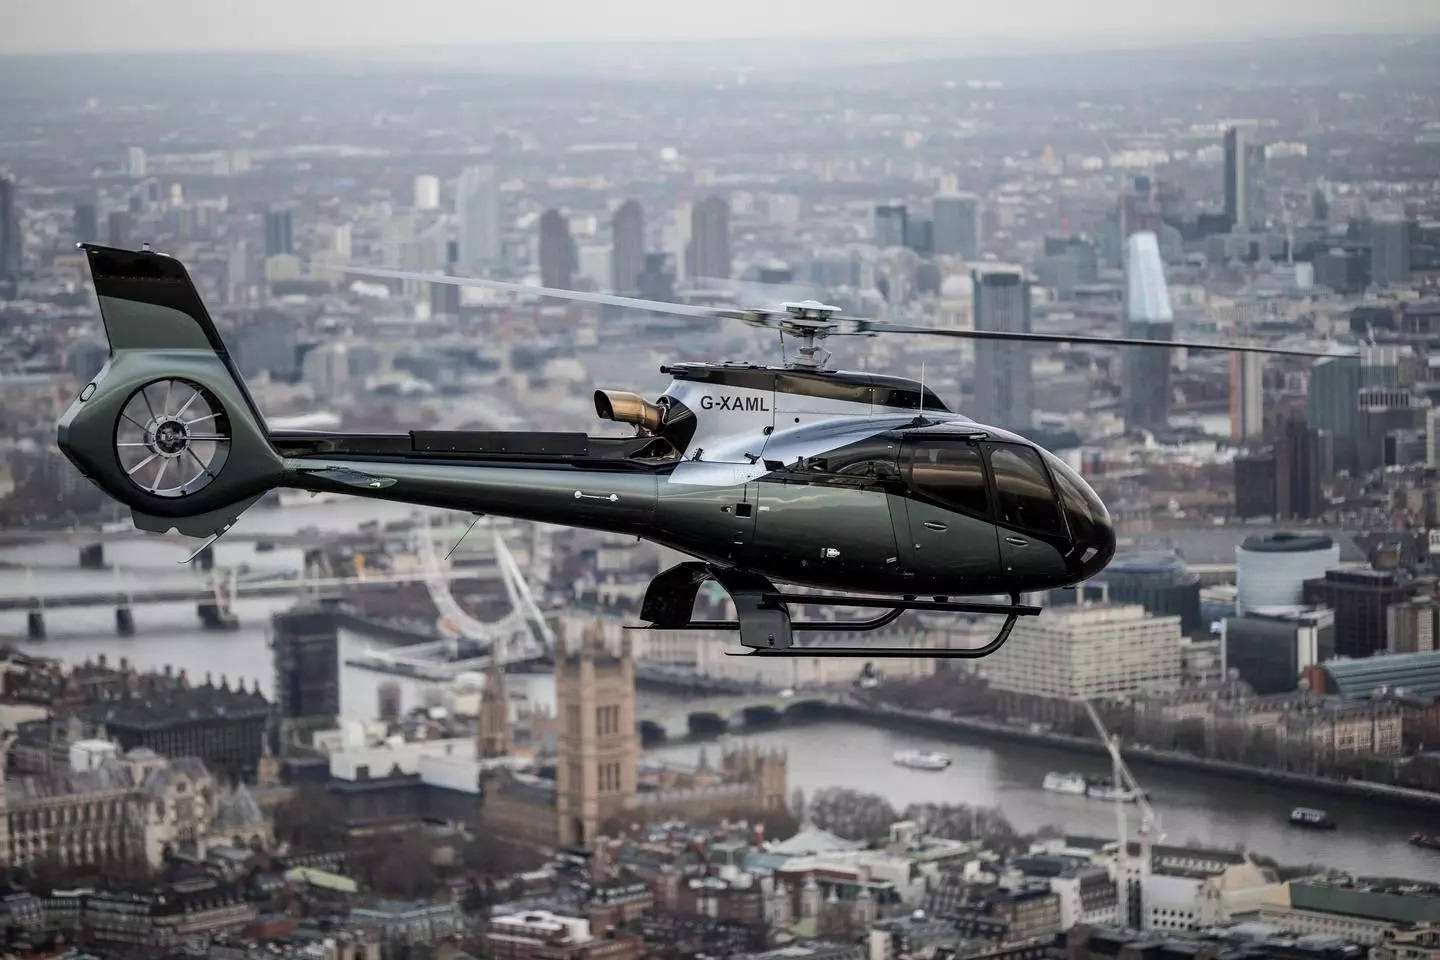 Two orders placed by North American customers for Airbus Corporate Helicopters